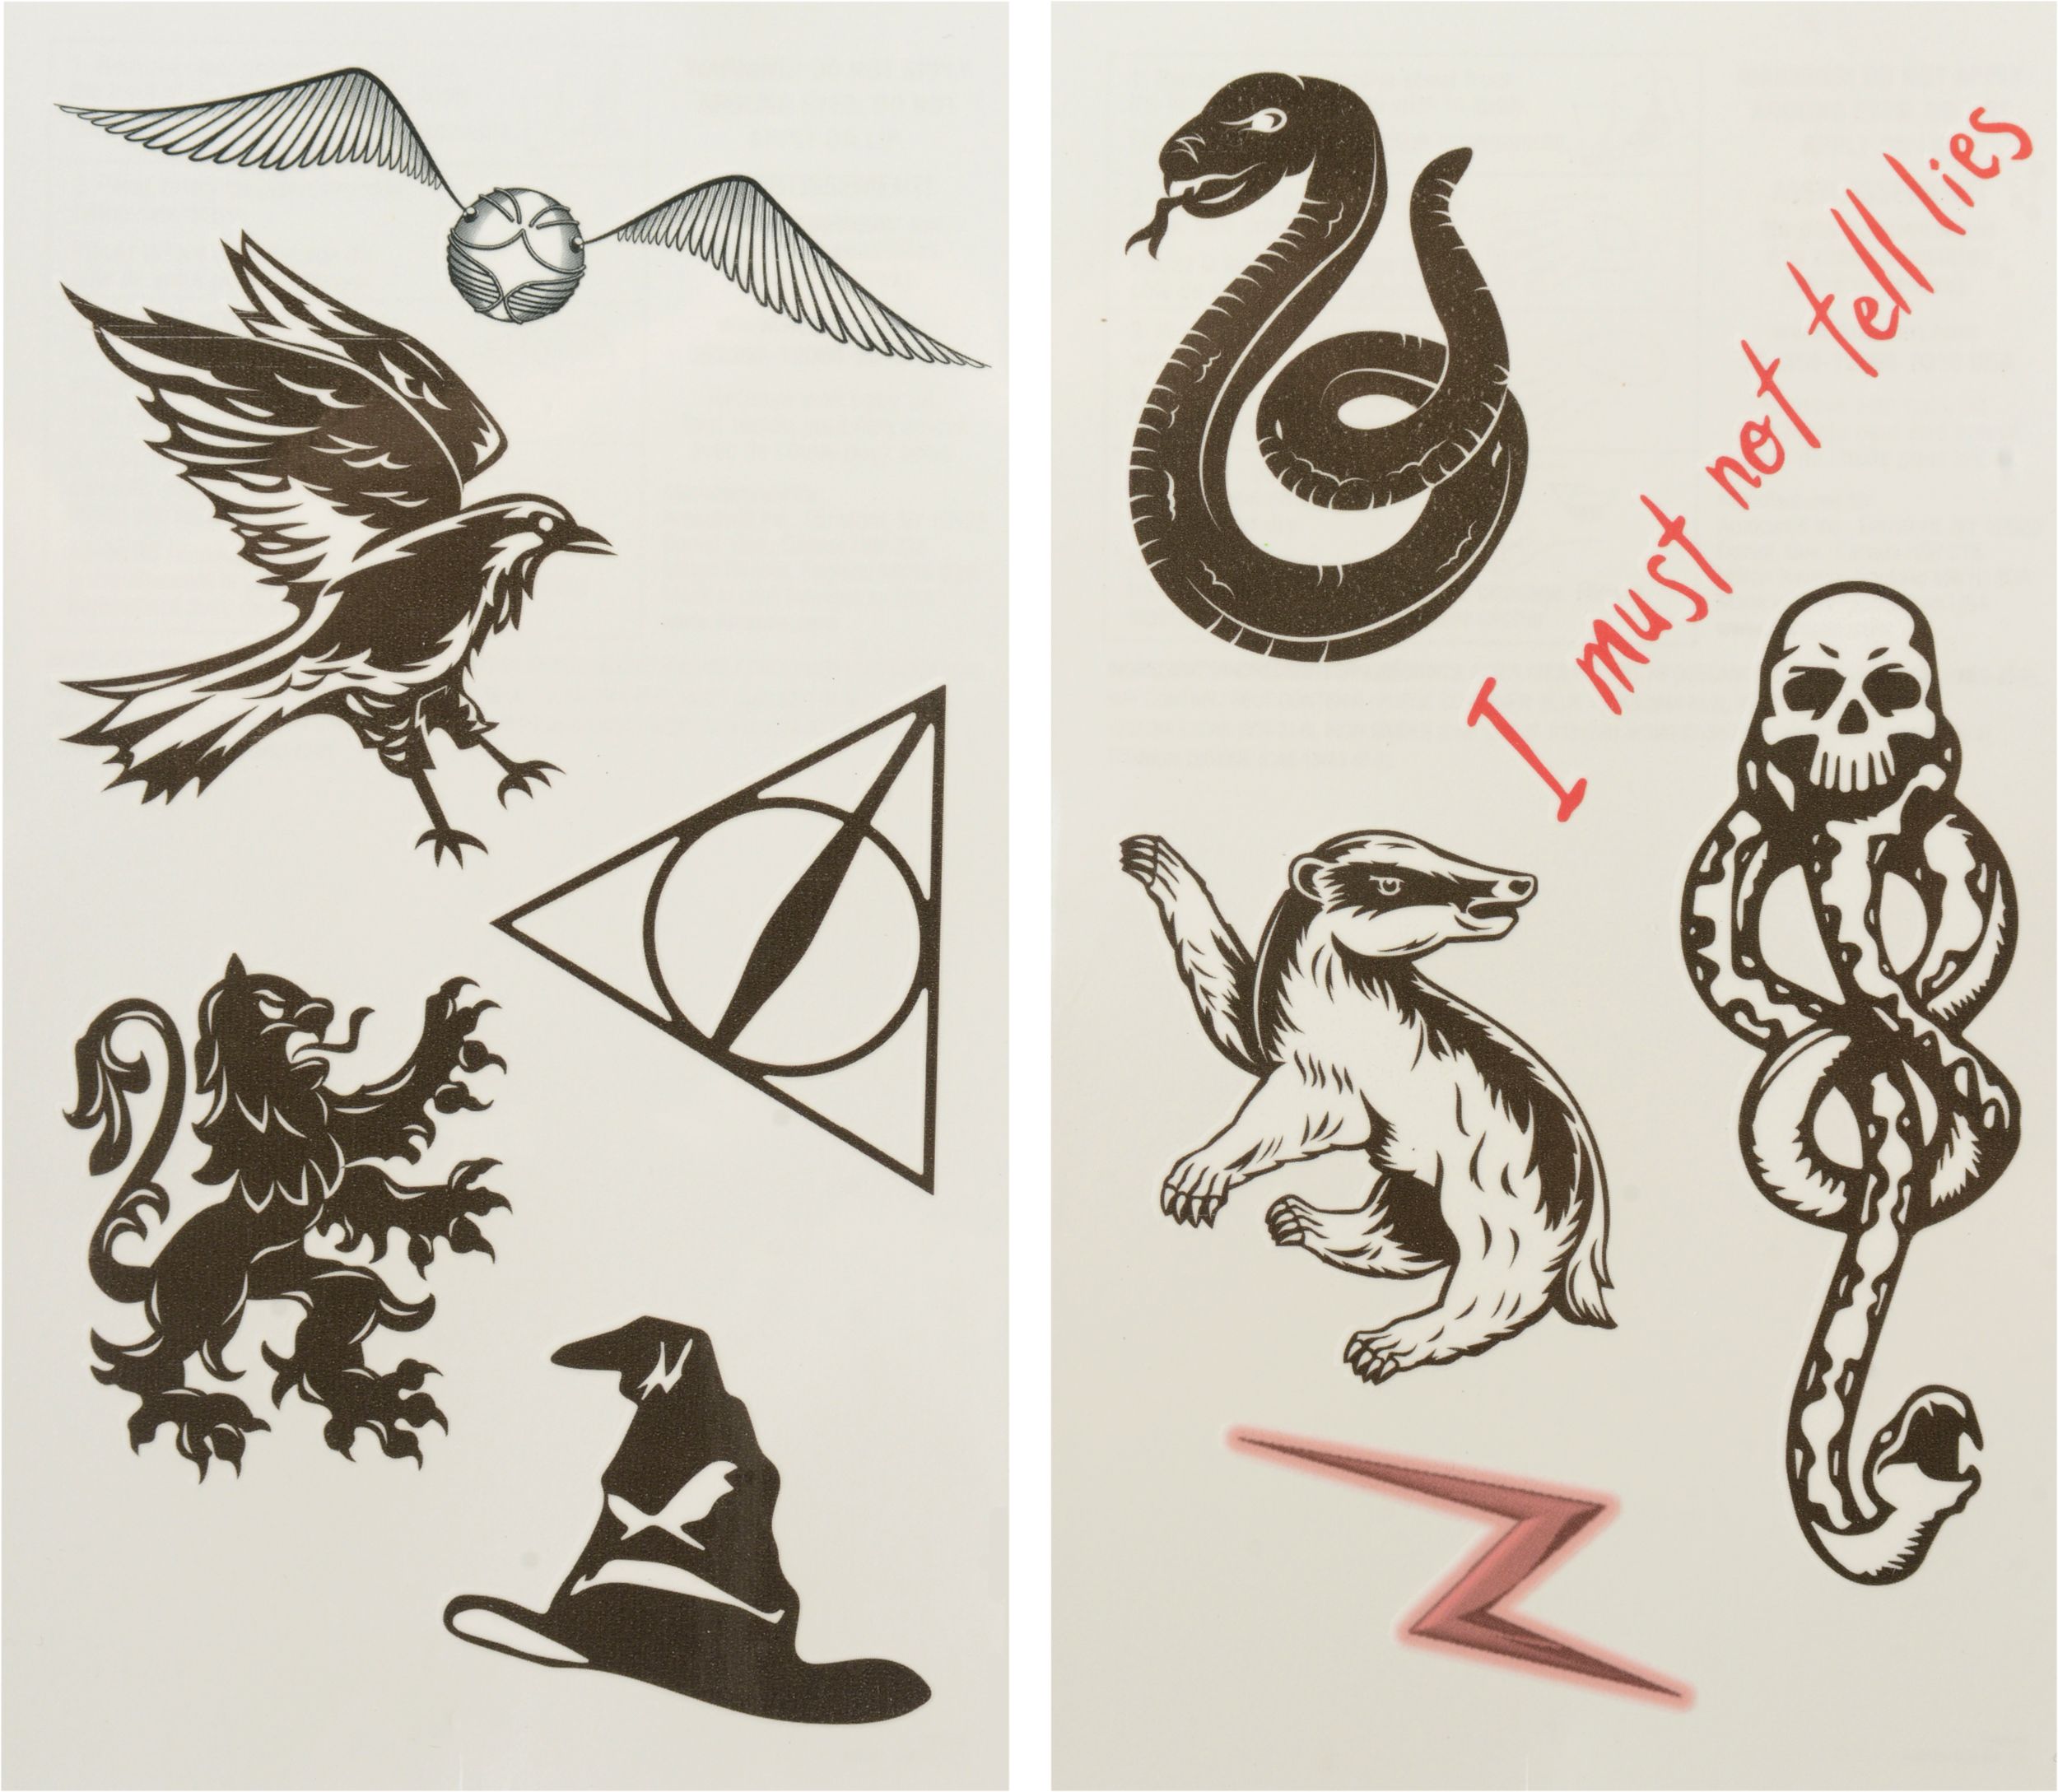 10 Magical Harry Potter Tattoos That Will Make You Want to Get Inked - Brit  + Co